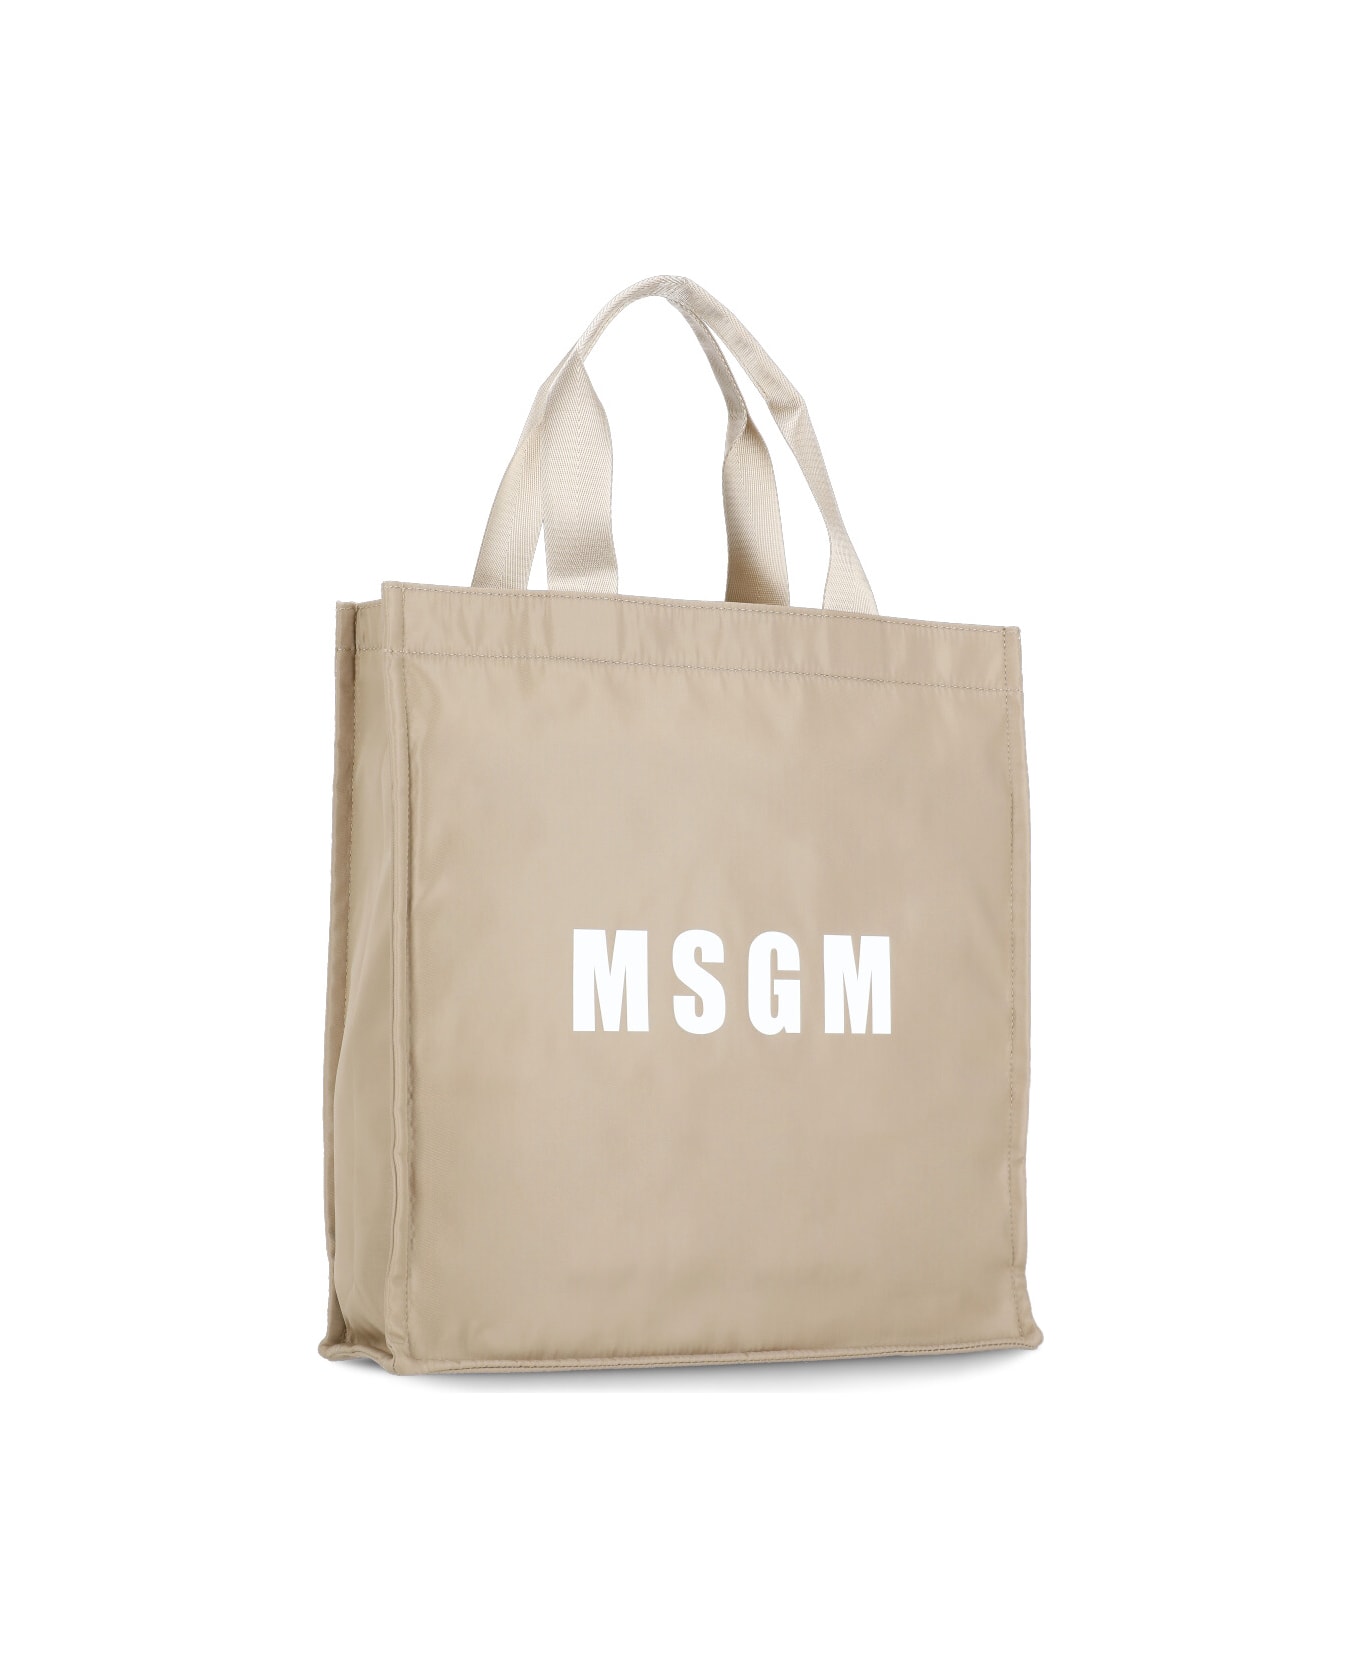 MSGM Tote Shopping Bag - Beige トートバッグ